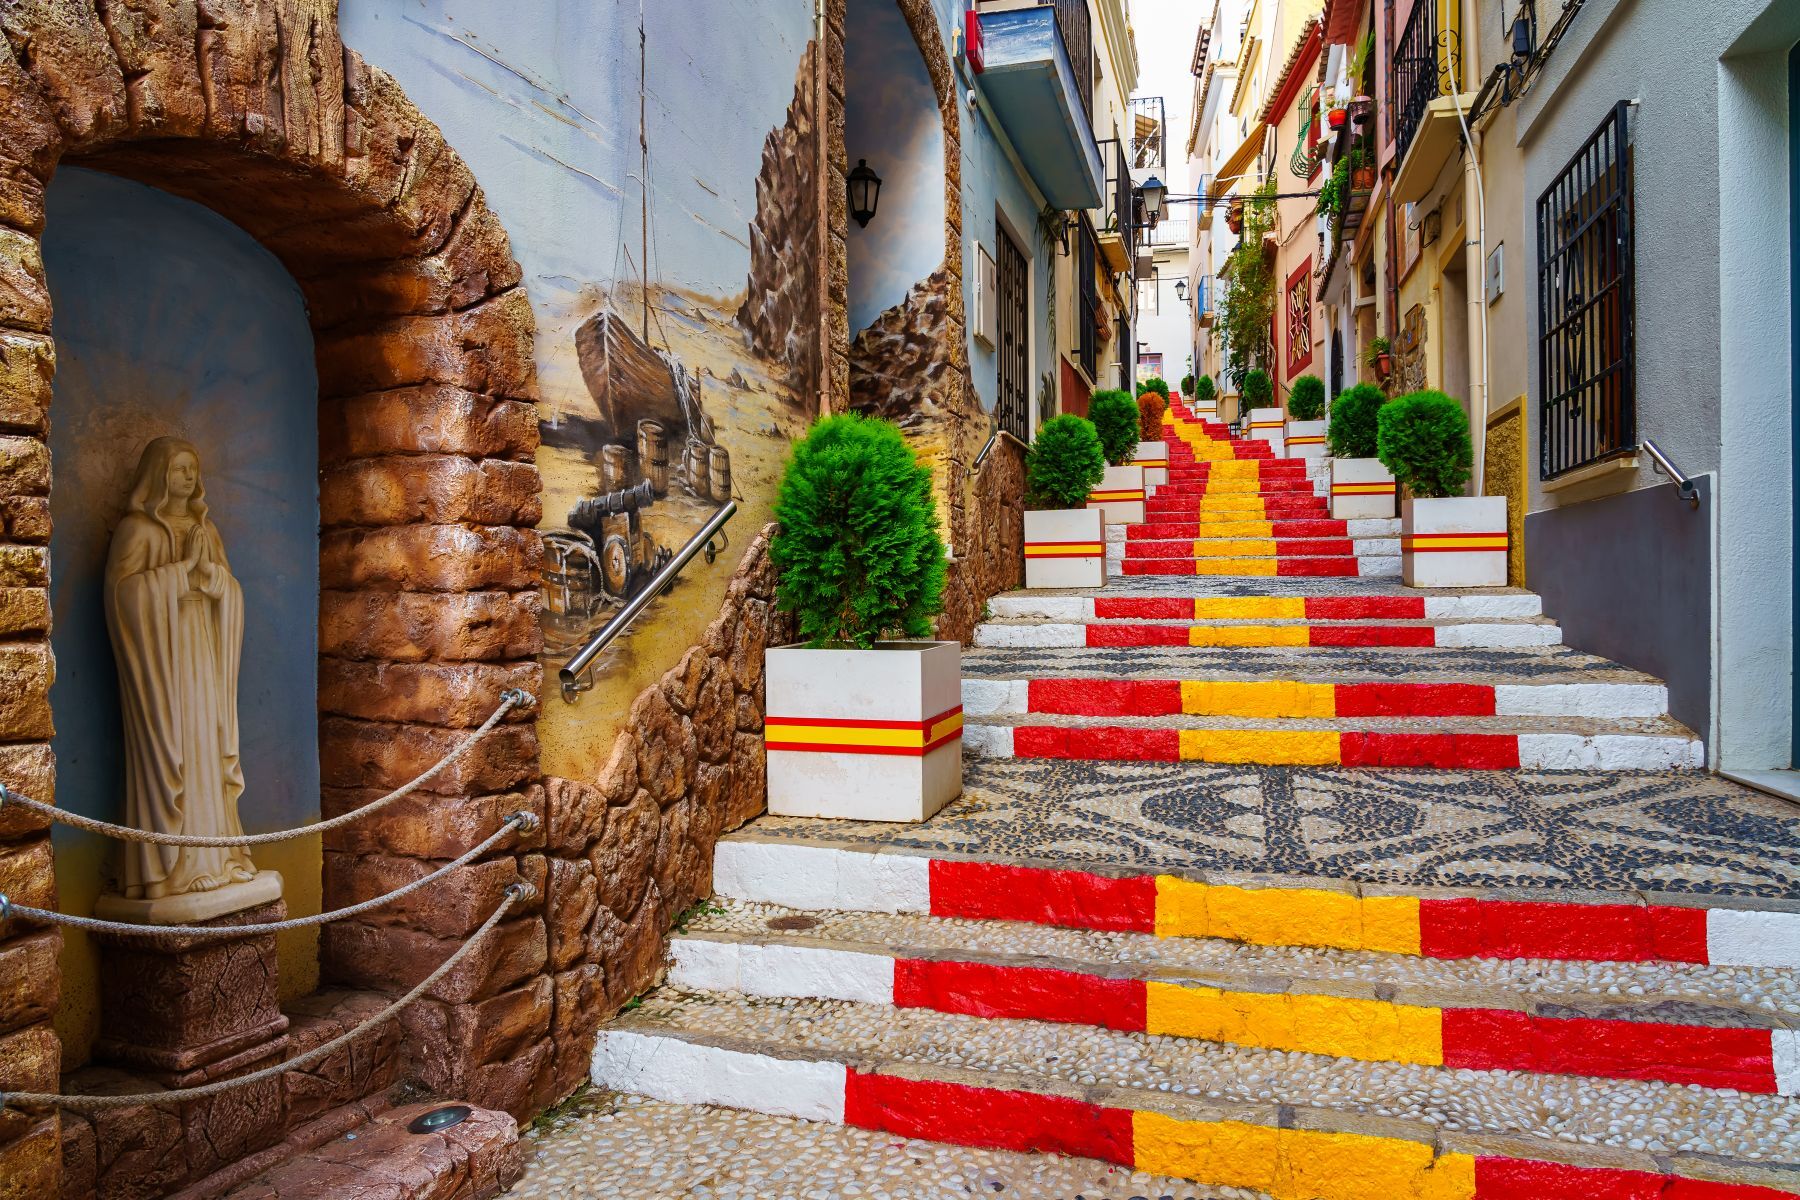 Narrow alley decorated with the flag of Spain on the steps in Calpe Alicante